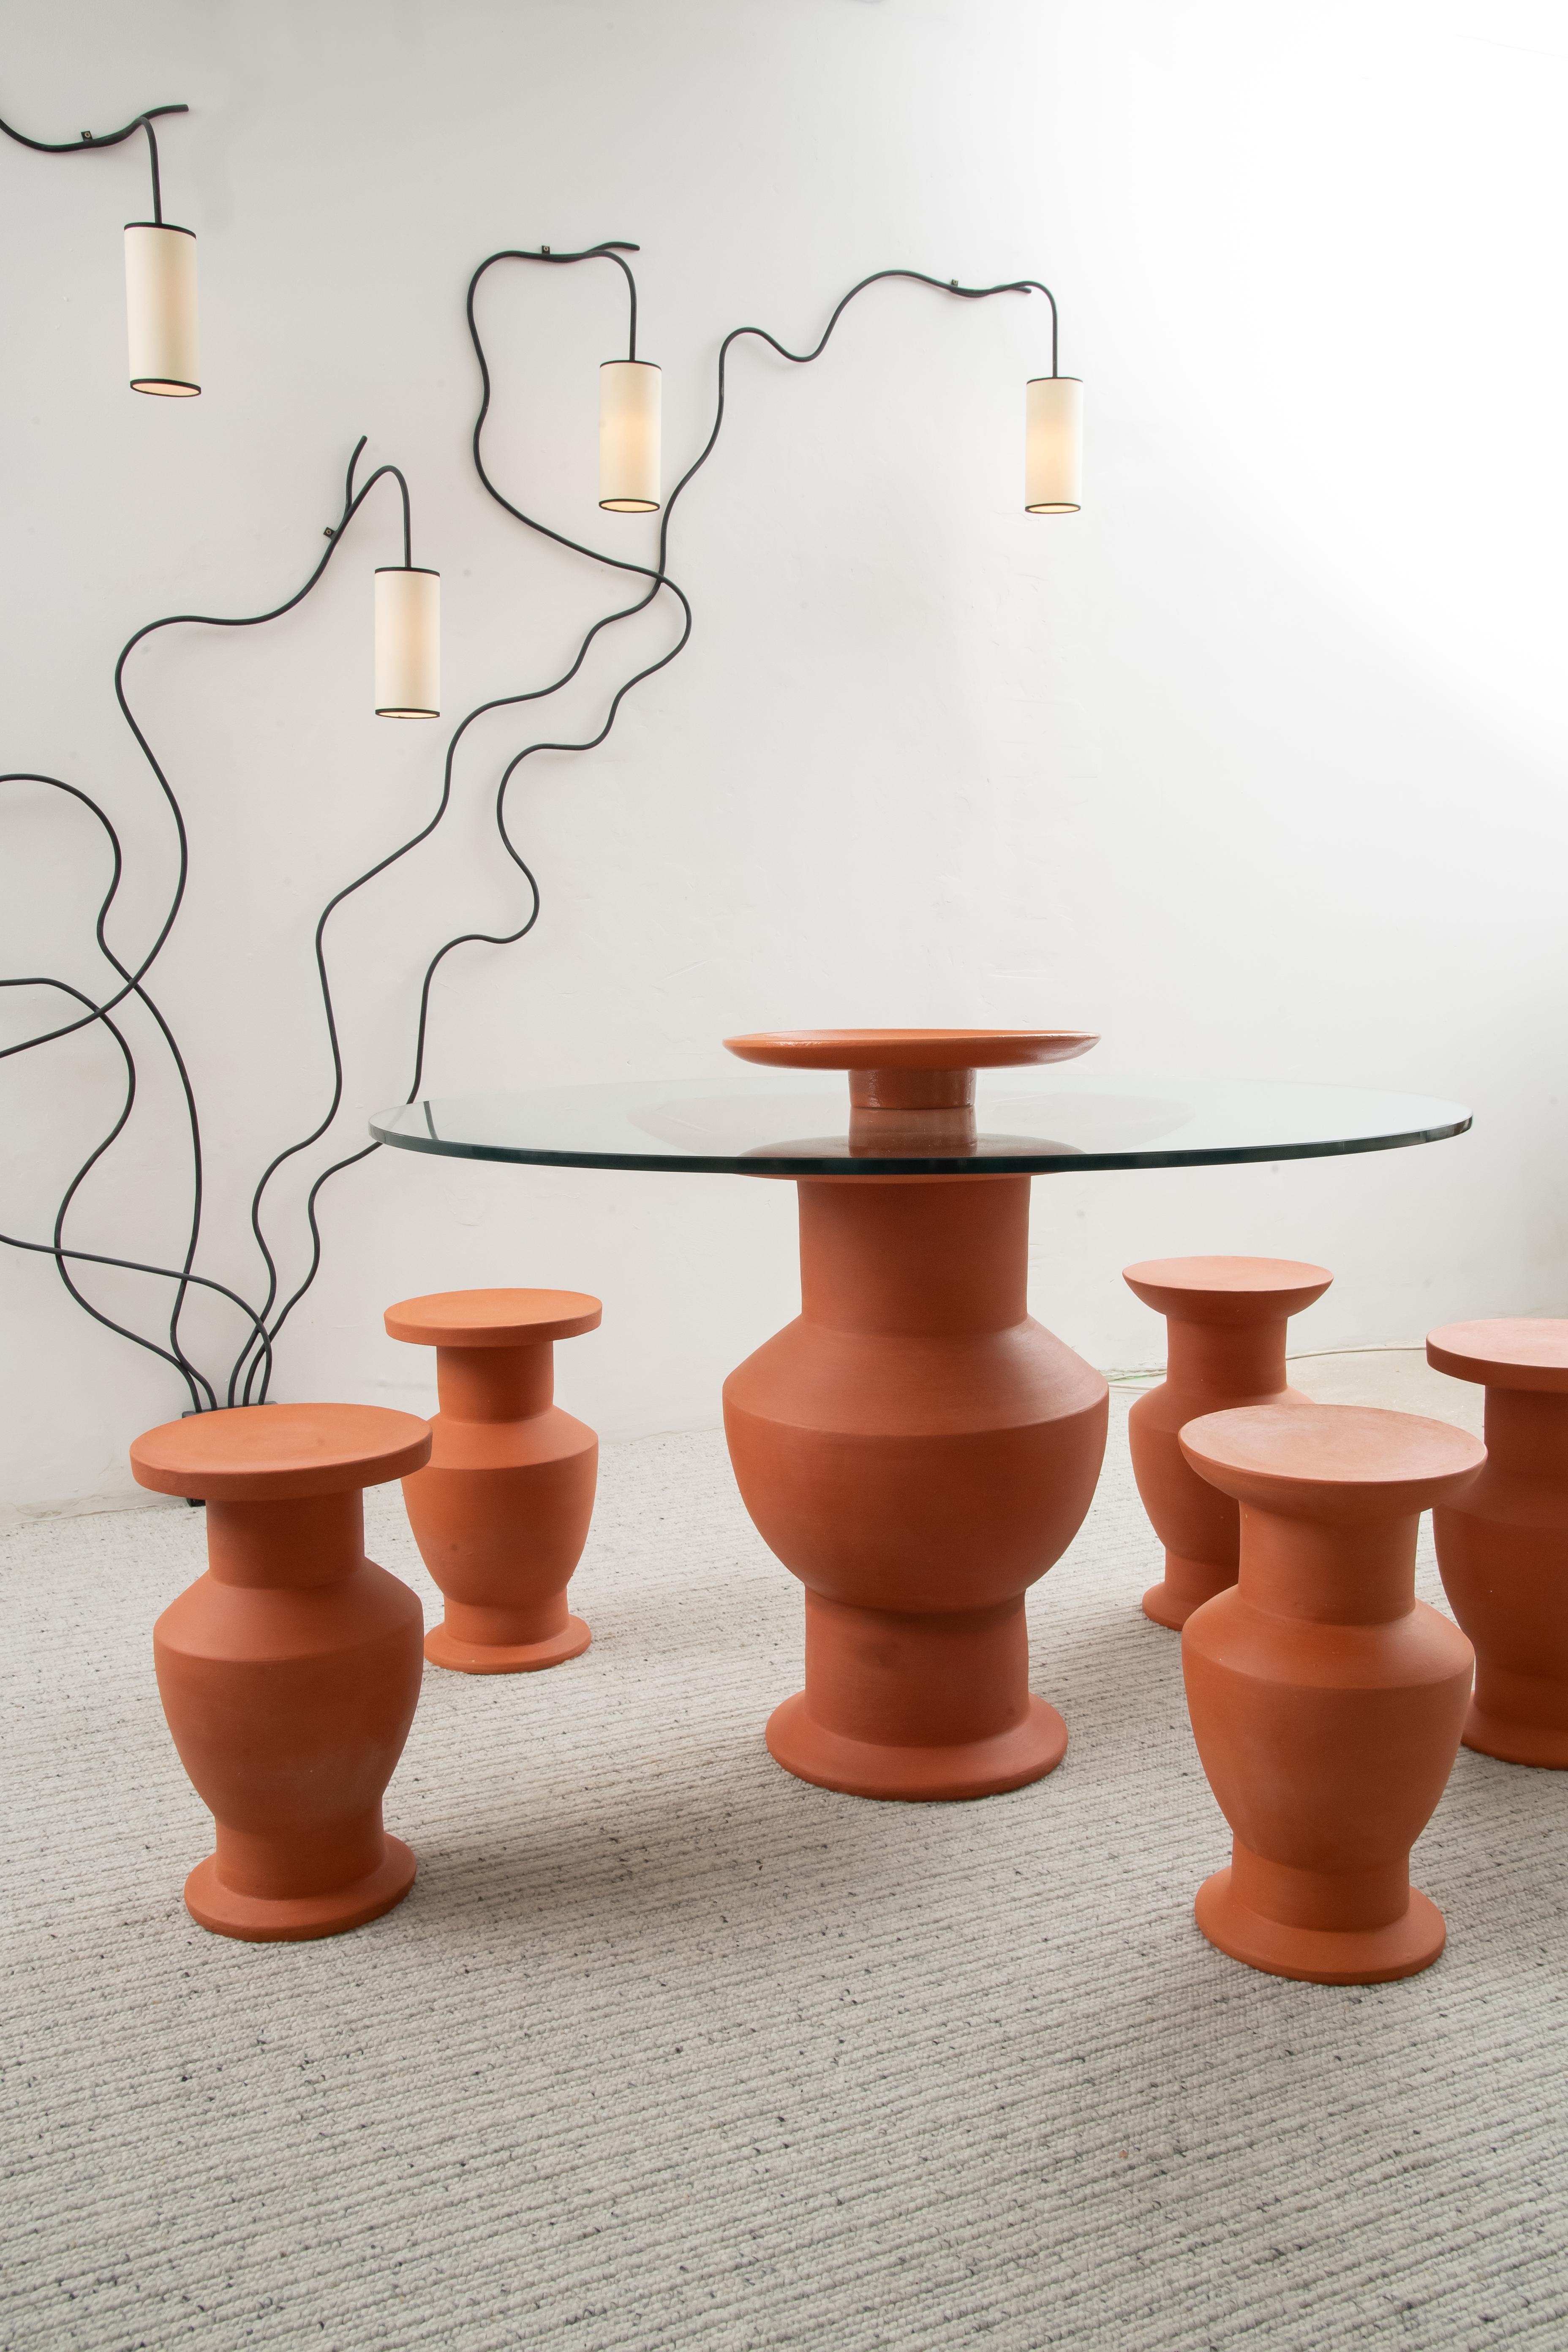 Post-Modern Contemporary Terracotta Ceramic Dining Table and Stools by Léa Ginac, 2022 For Sale